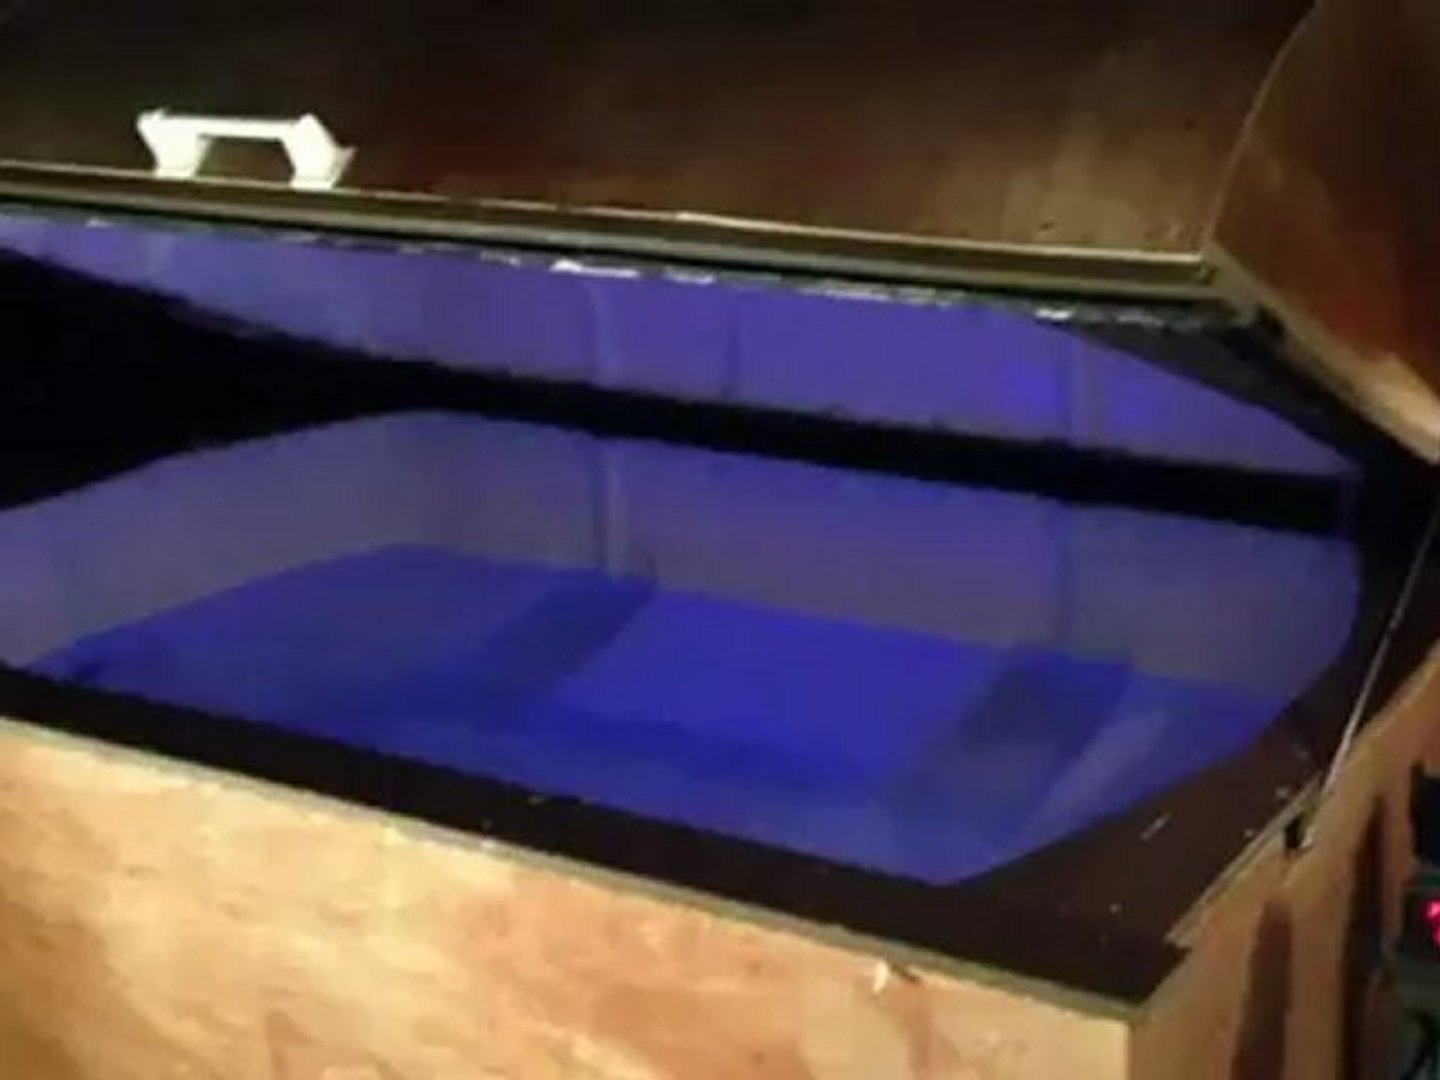 how to make your own sensory deprivation tank